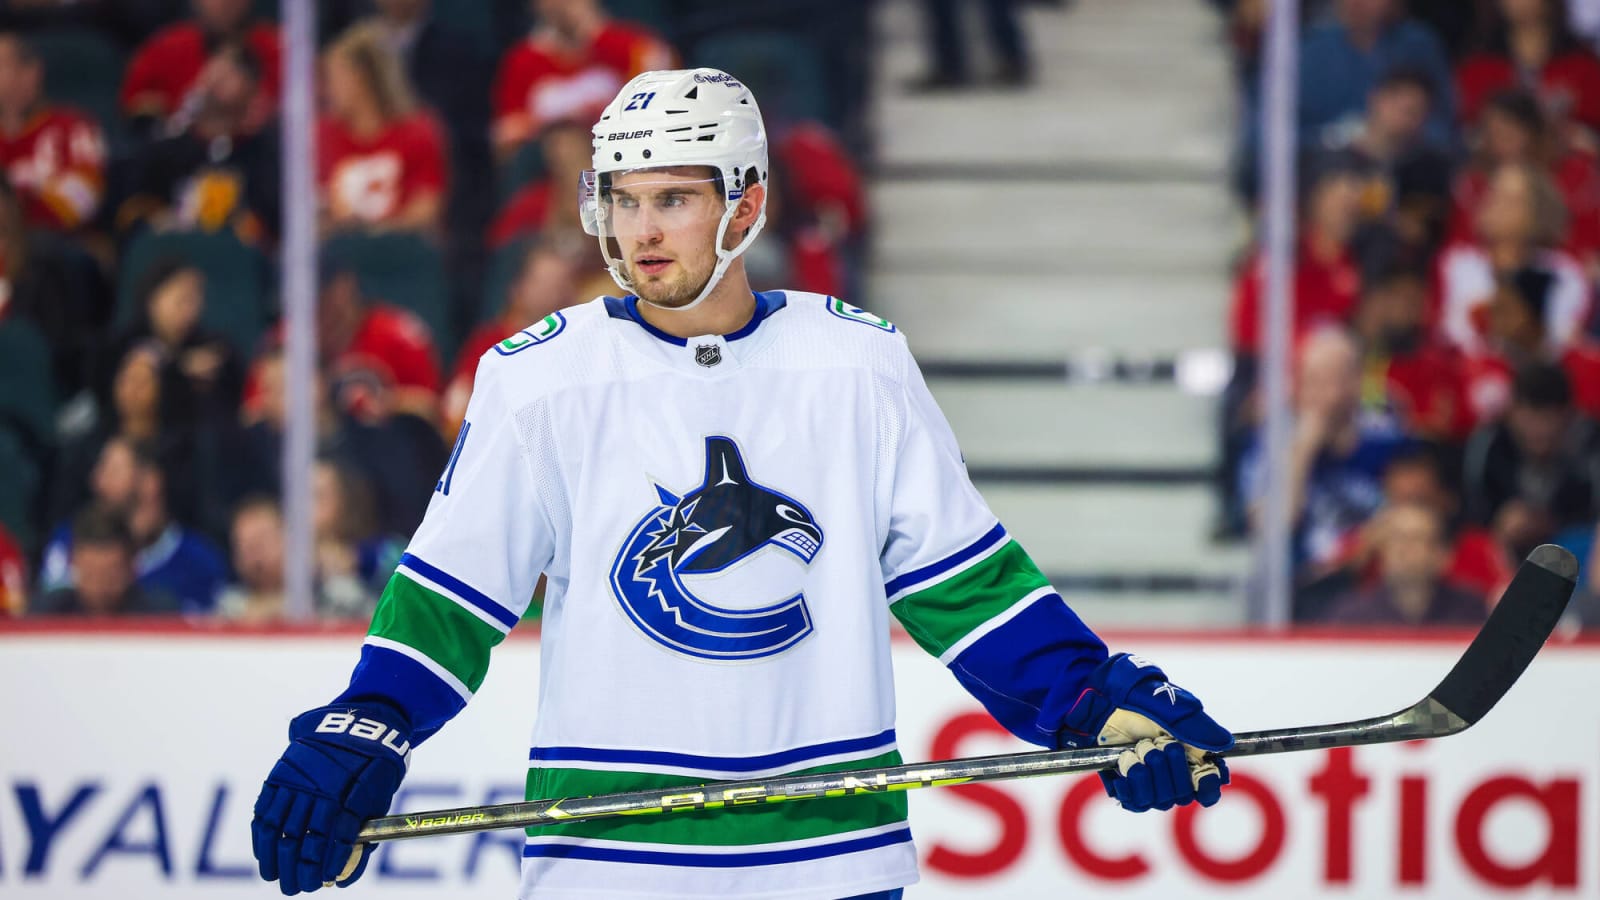 Canucks’ Hoglander Has an Opportunity to Breakout in 2023-24